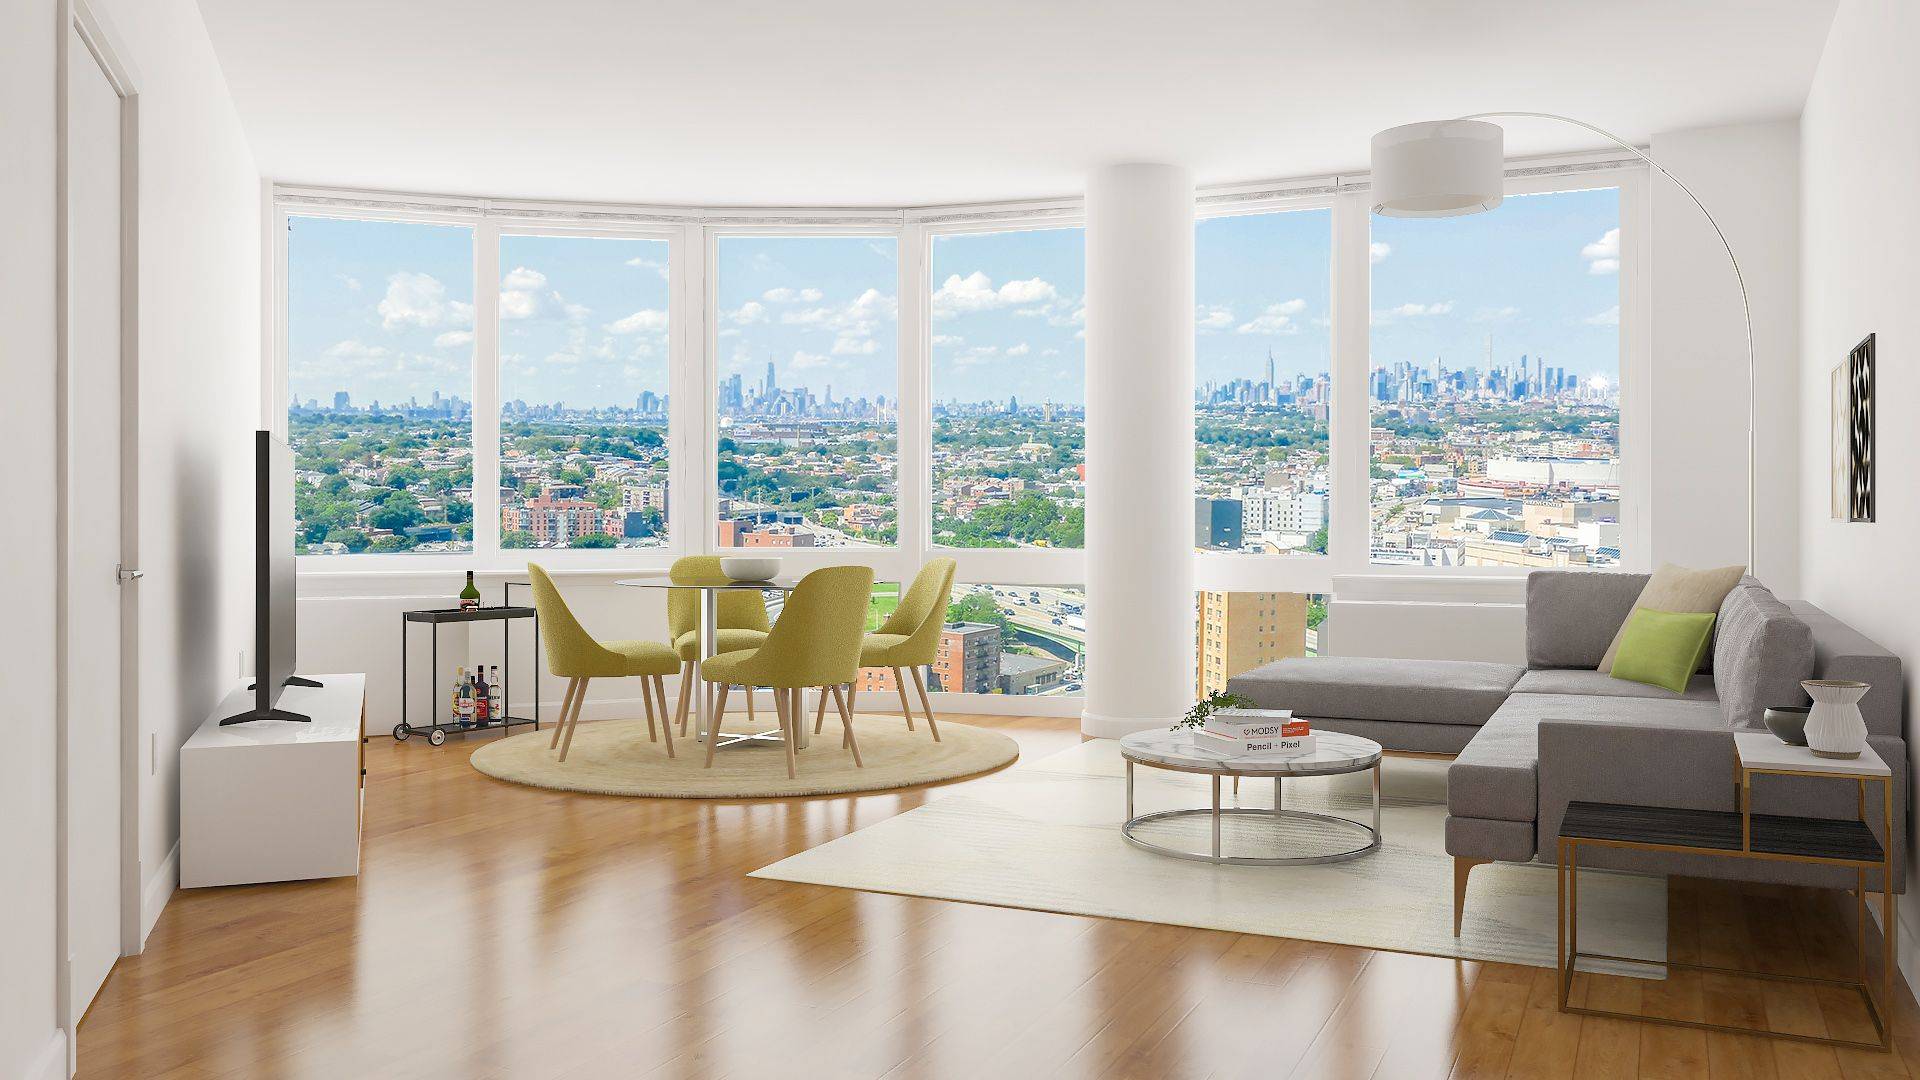 Spectacular 2 bedroom with oversized curved windows showcasing breathtaking views of the Manhattan skyline.